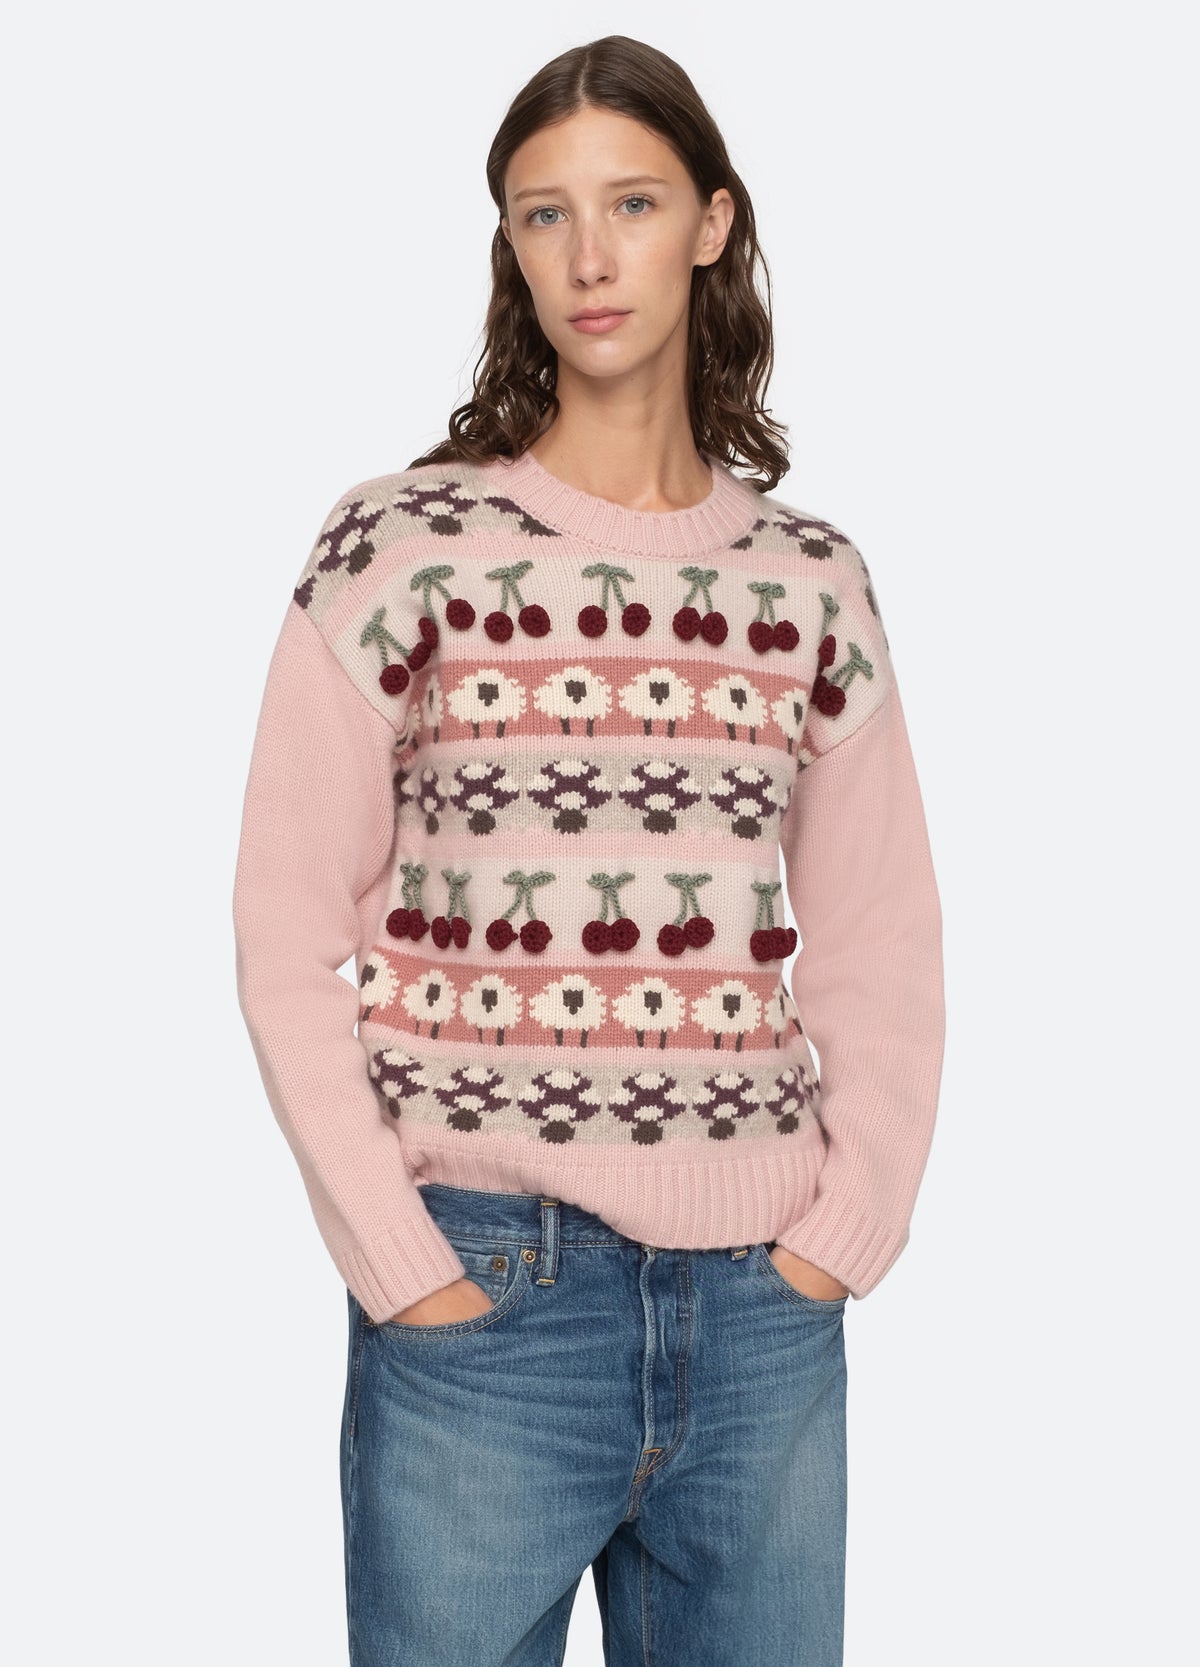 pink-molly sweater-front view 2 - 9